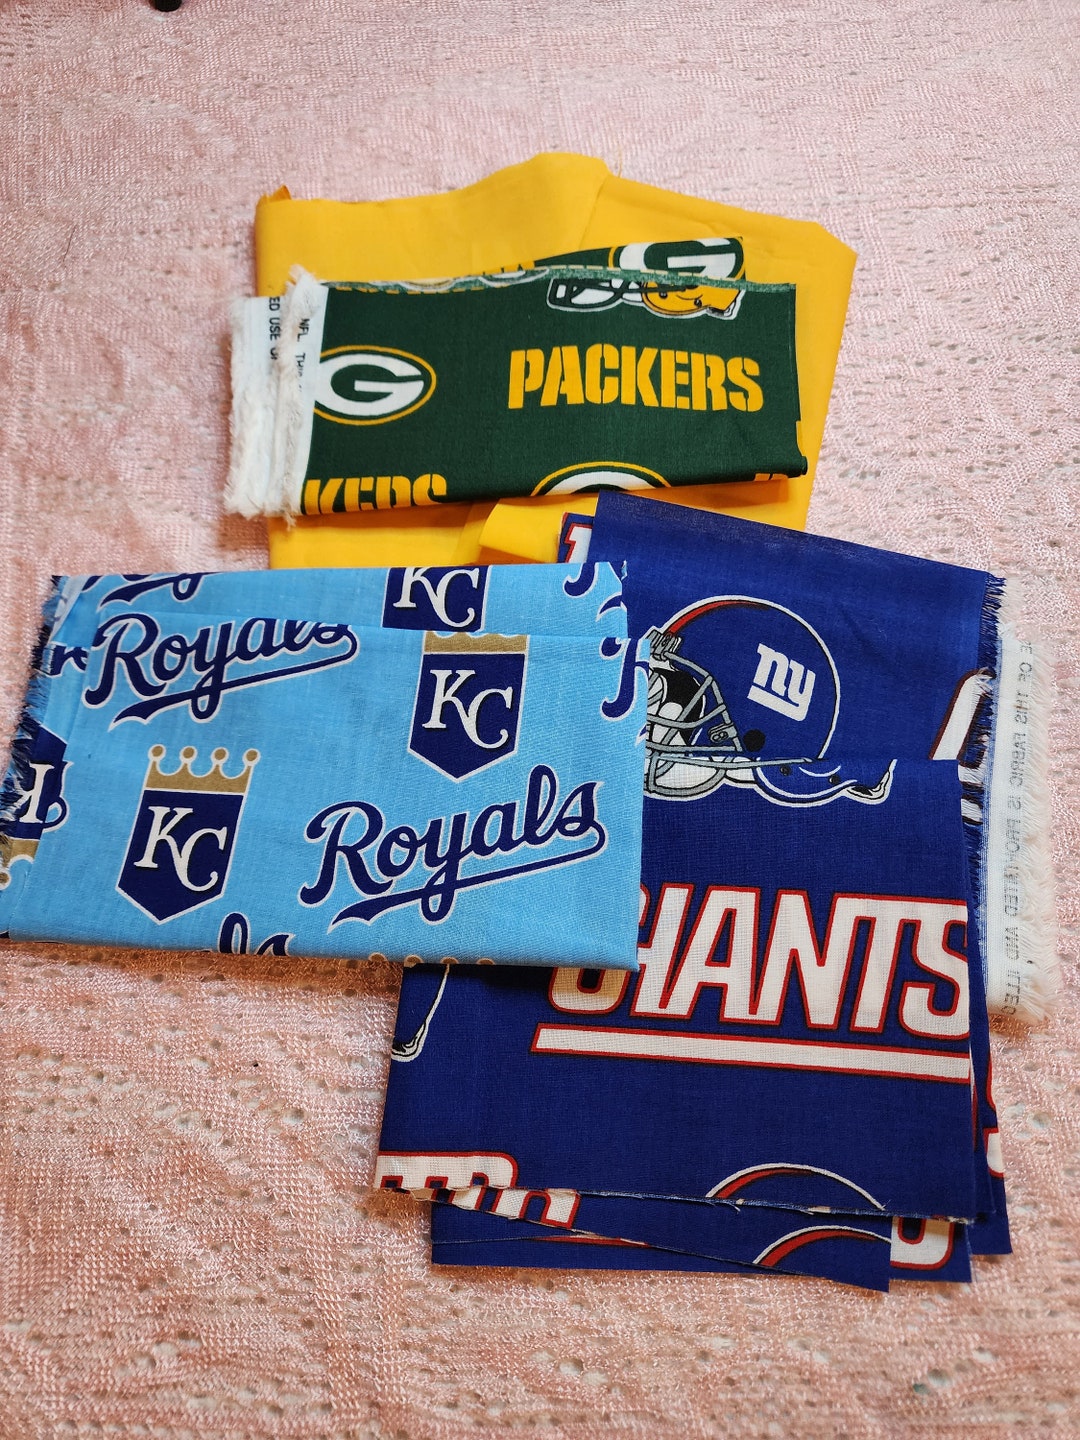 Fabric Remnants for the Green Bay Packers the Kansas City 